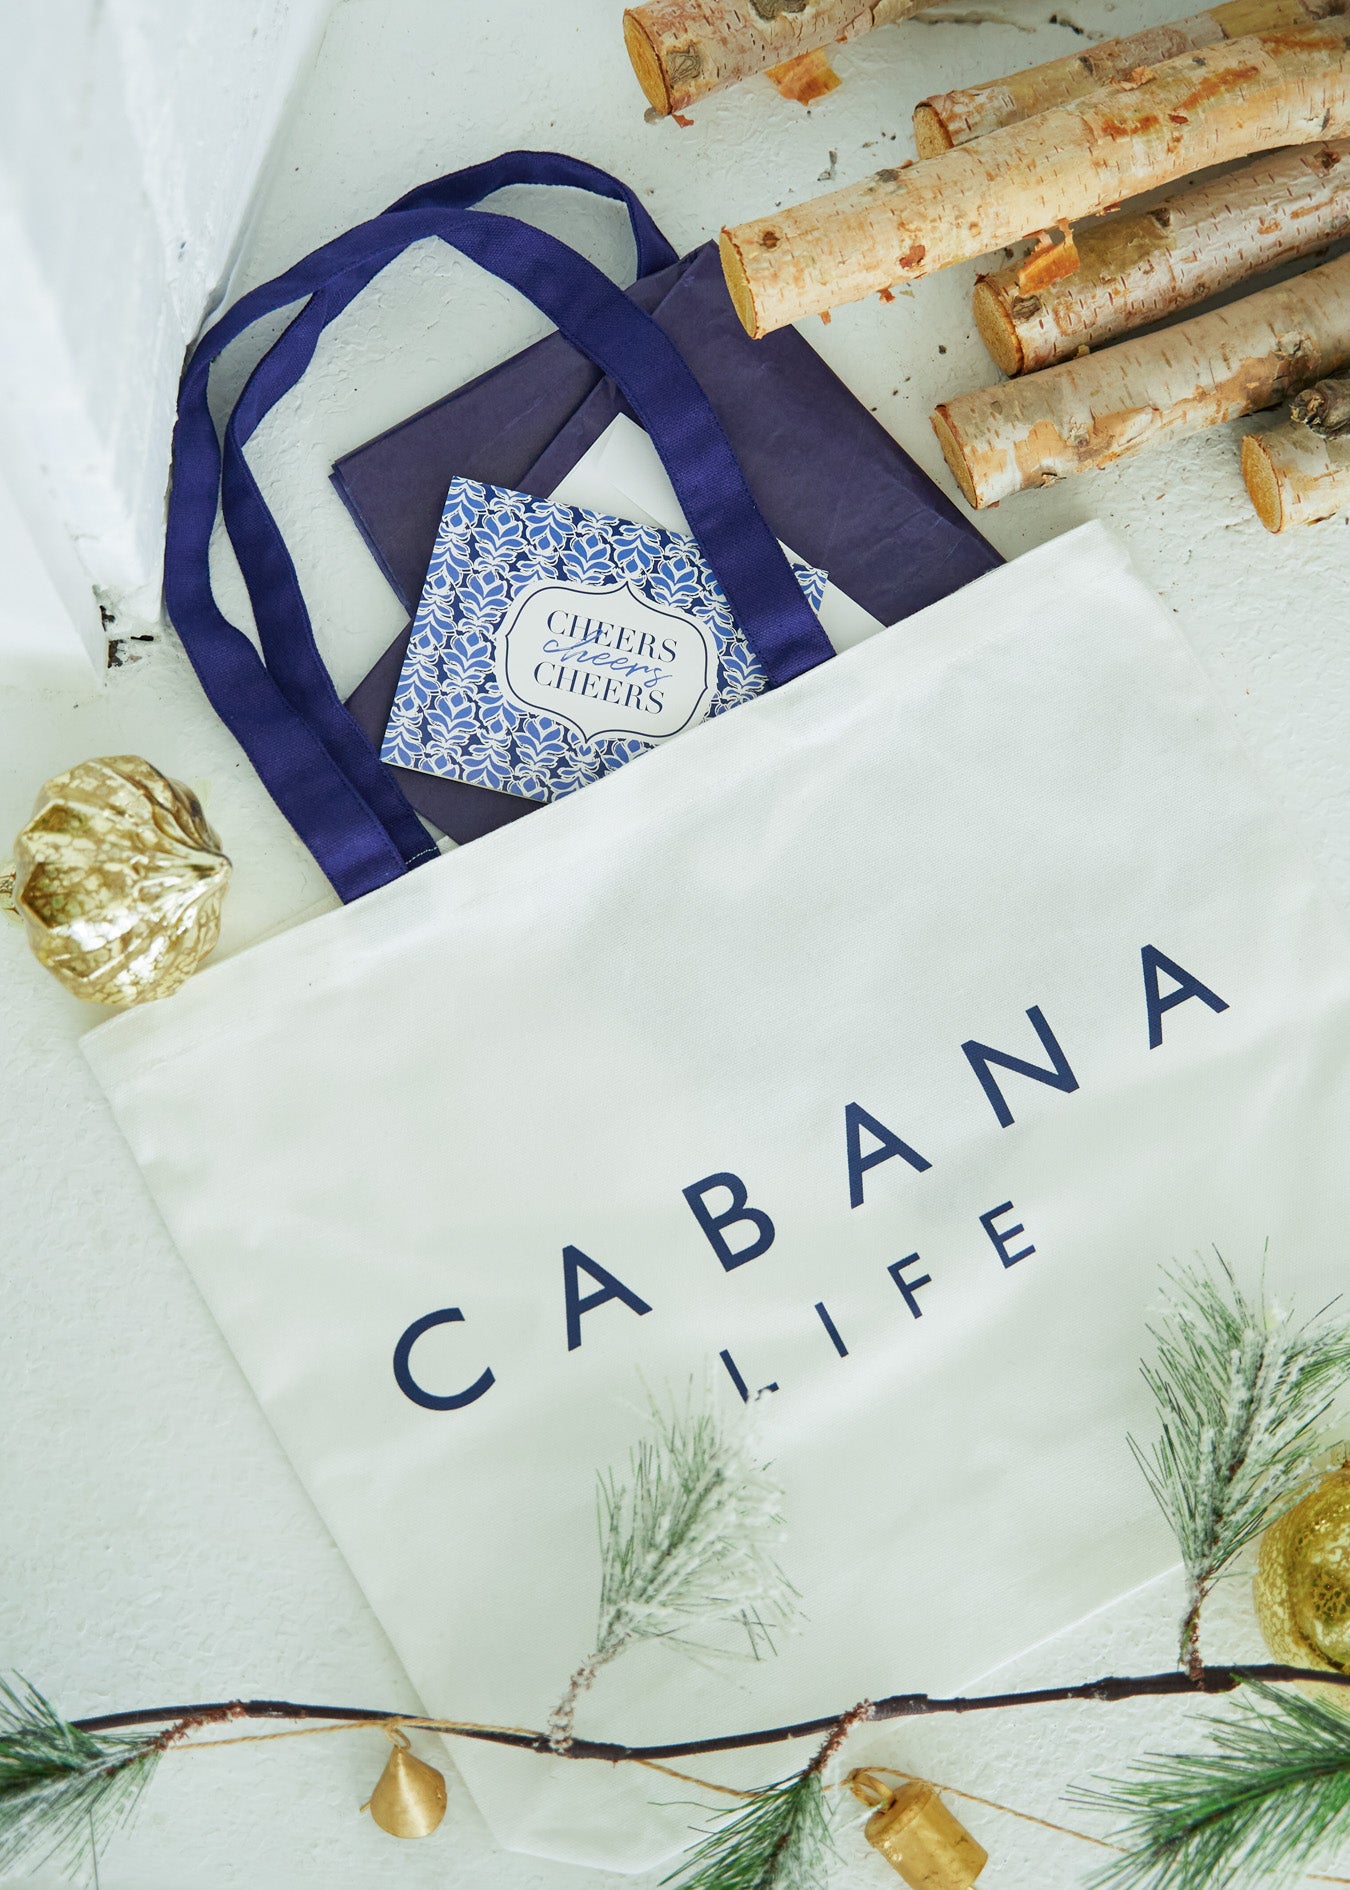 White canvas Cabana Life Tote Bag, navy tissue paper and Cheers greeting card peeking out by ornaments and firewood